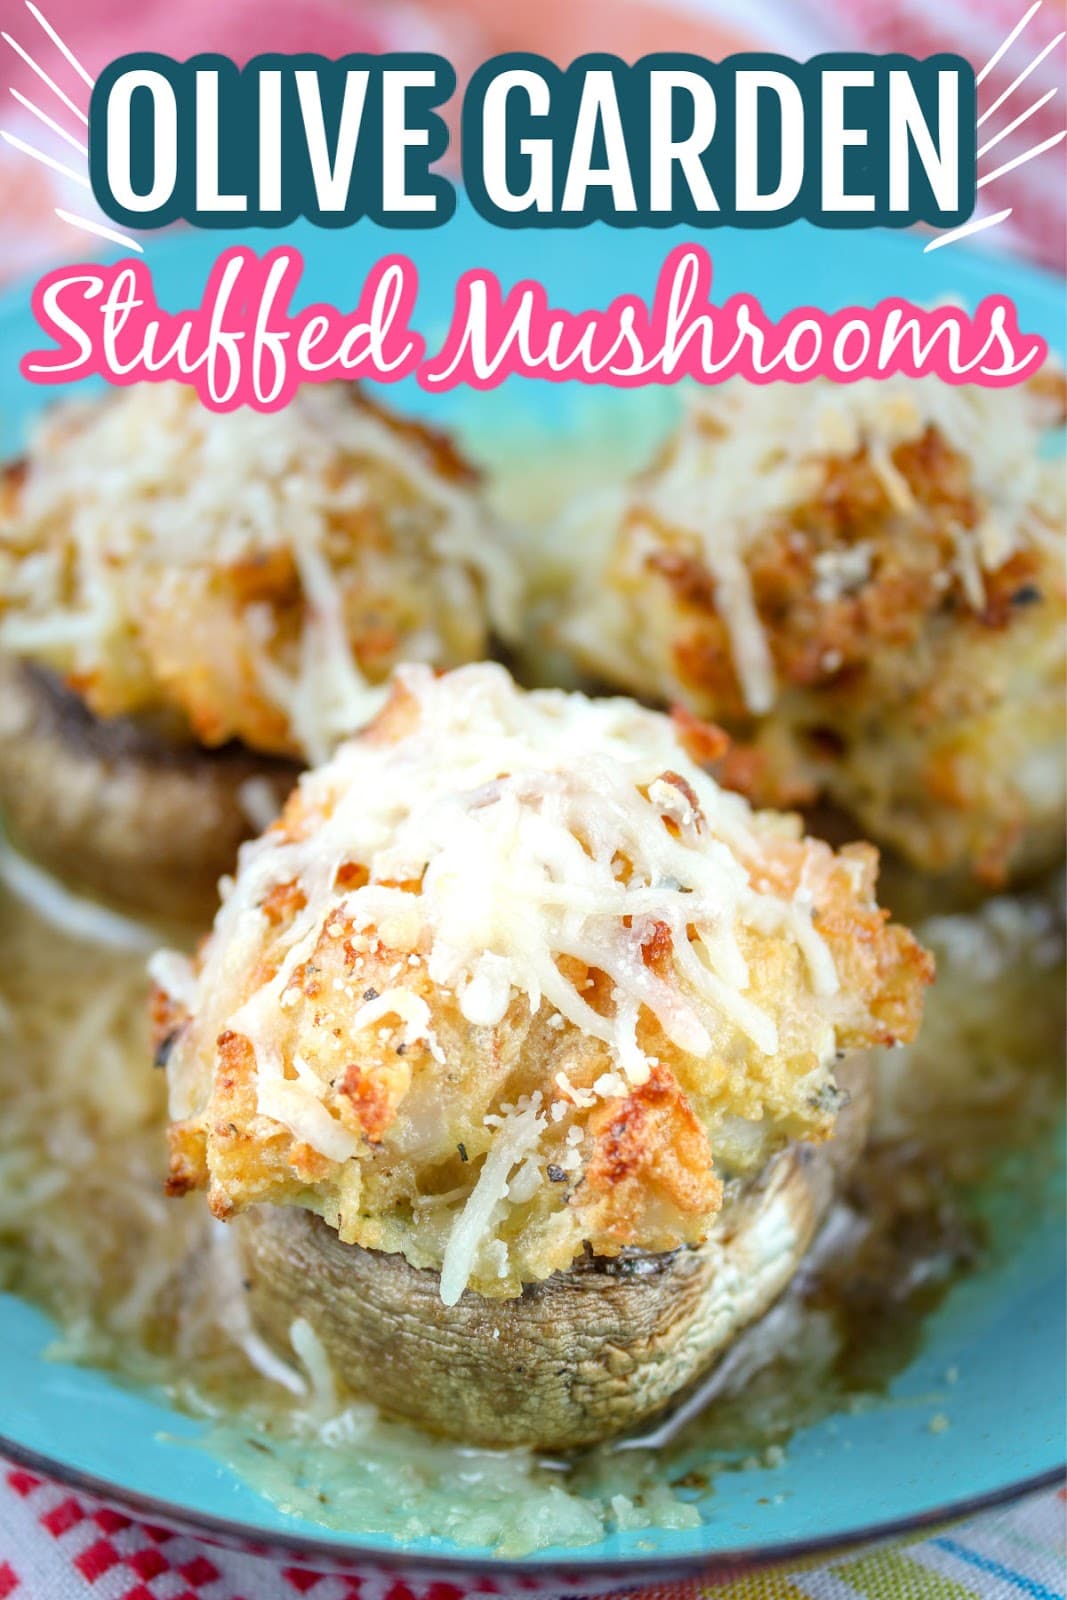 Olive Garden Stuffed Mushrooms are one of their most popular appetizers and surprisingly easy to make at home! These delightful bites are stuffed with shrimp & scallops, cheese and breadcrumbs.
 via @foodhussy